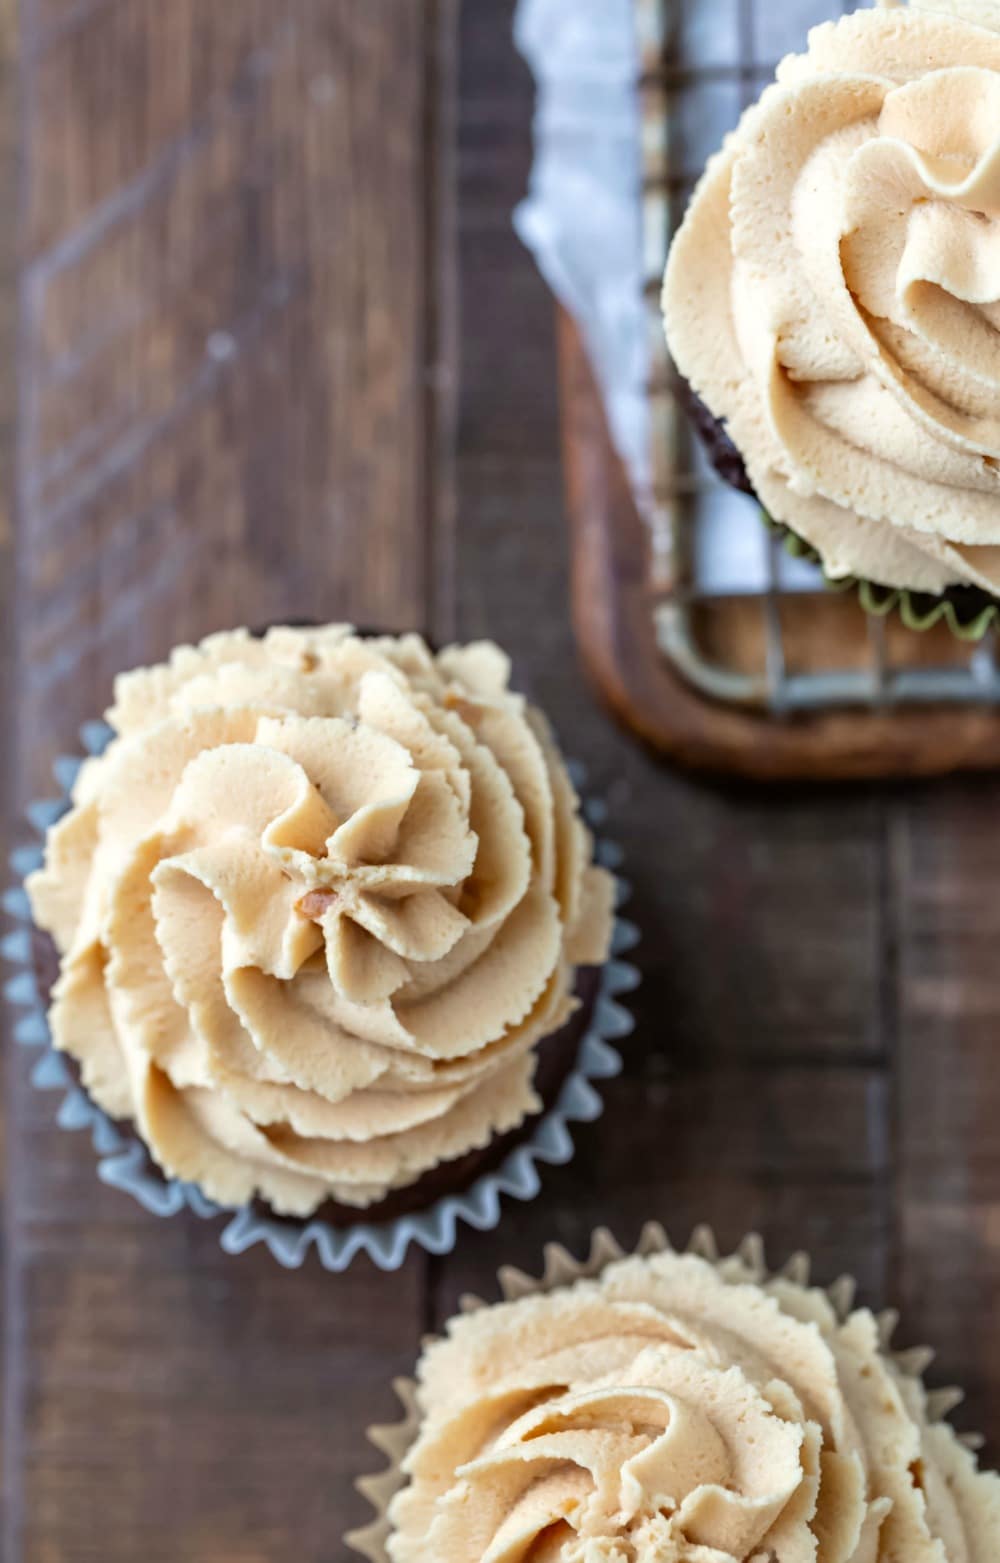 Peanut butter frosting on chocolate cupcake on a wooden background